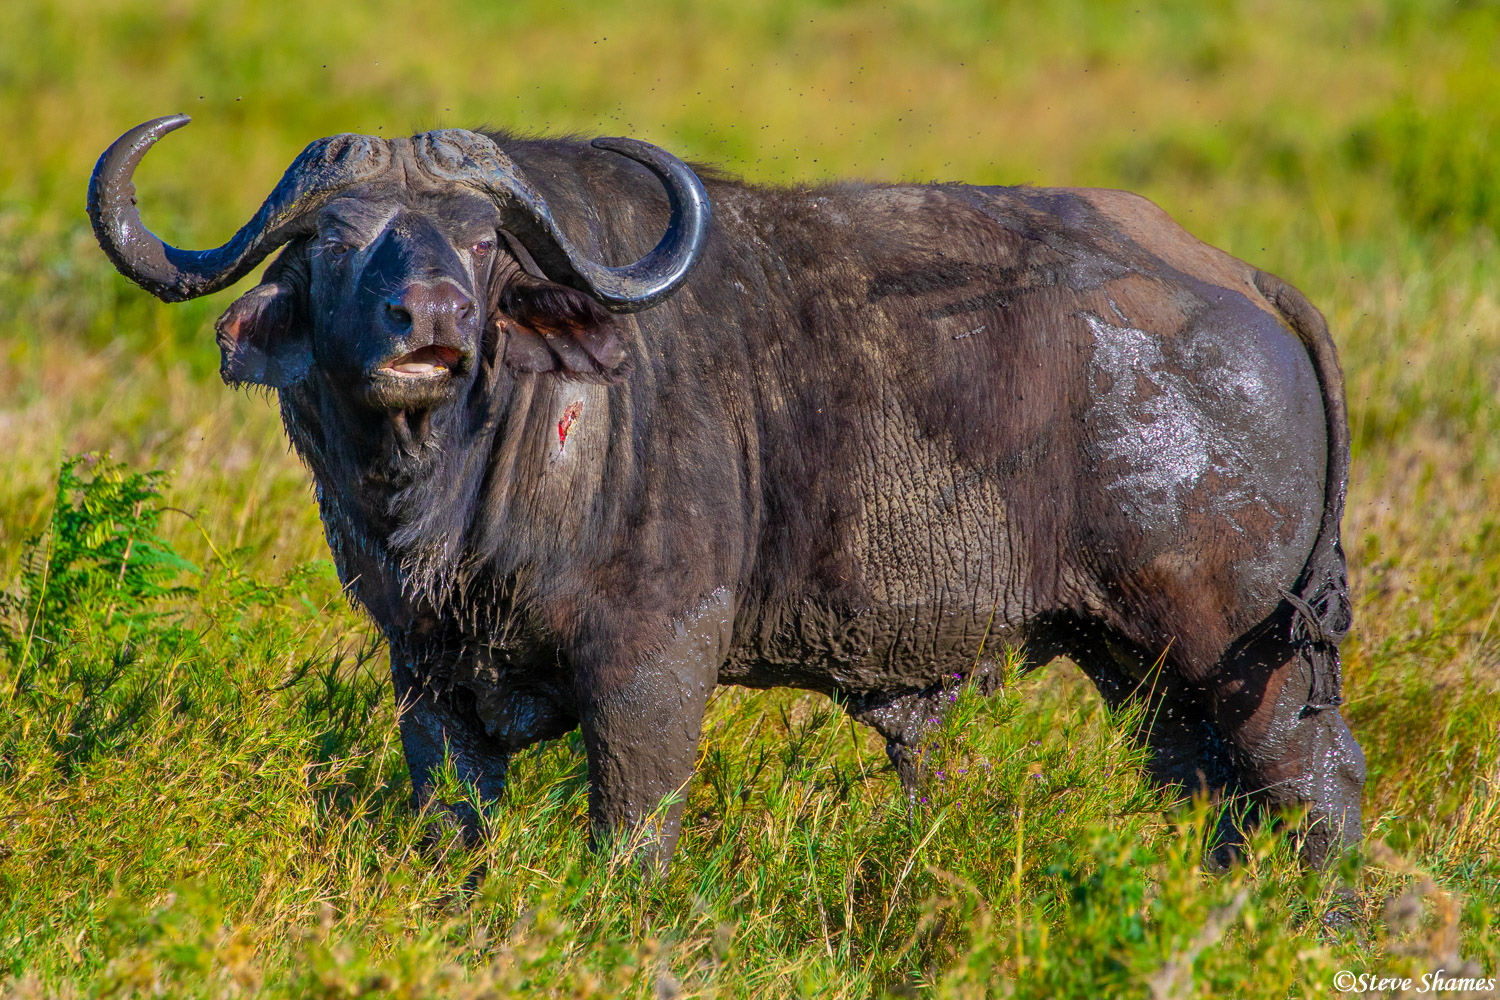 Here is a crusty muddy old Cape buffalo. Always surrounded by a cloud of flies.